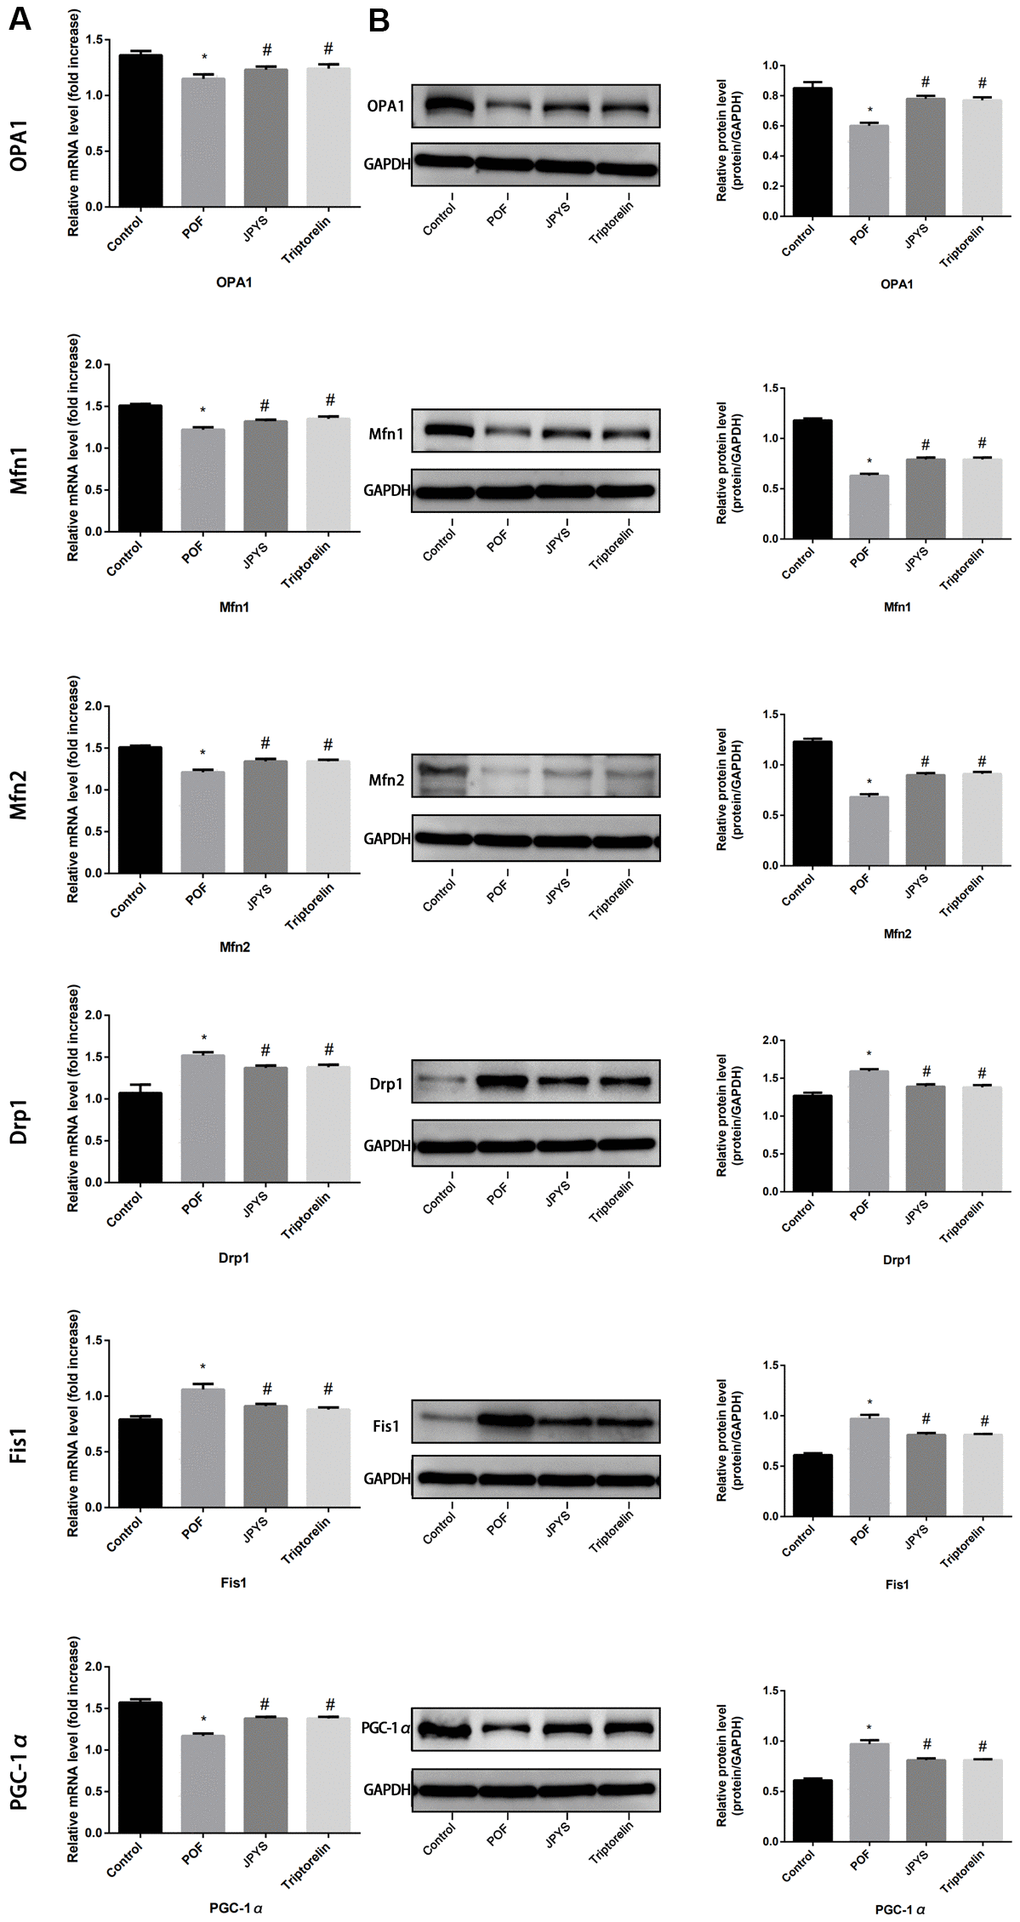 JPYS improved mitochondrial biogenesis and dynamics in premature ovarian failure (POF) rats. Rats were treated with JPYS (11.0 g/kg.d) and pre-treated with triptorelin (1.5 mg/kg) followed by intraperitoneally injected cyclophosphamide (50 mg/kg). We used real-time qPCR and western blot to detect mitochondrial biogenesis and dynamics. We chose OPA1, Mfn1, and Mfn2 to represent mitochondrial biogenesis function, and PGC-1α to represent the dynamic mitochondrial fusion, and Drp1 and Fis1 to represent mitochondrial fission. The expression of OPA1, Mfn1, Mfn2, PGC-1α, Drp1, and Fis1 in mRNA (A) and protein (B) levels. Data are shown as mean ± SD. *p #p △p 